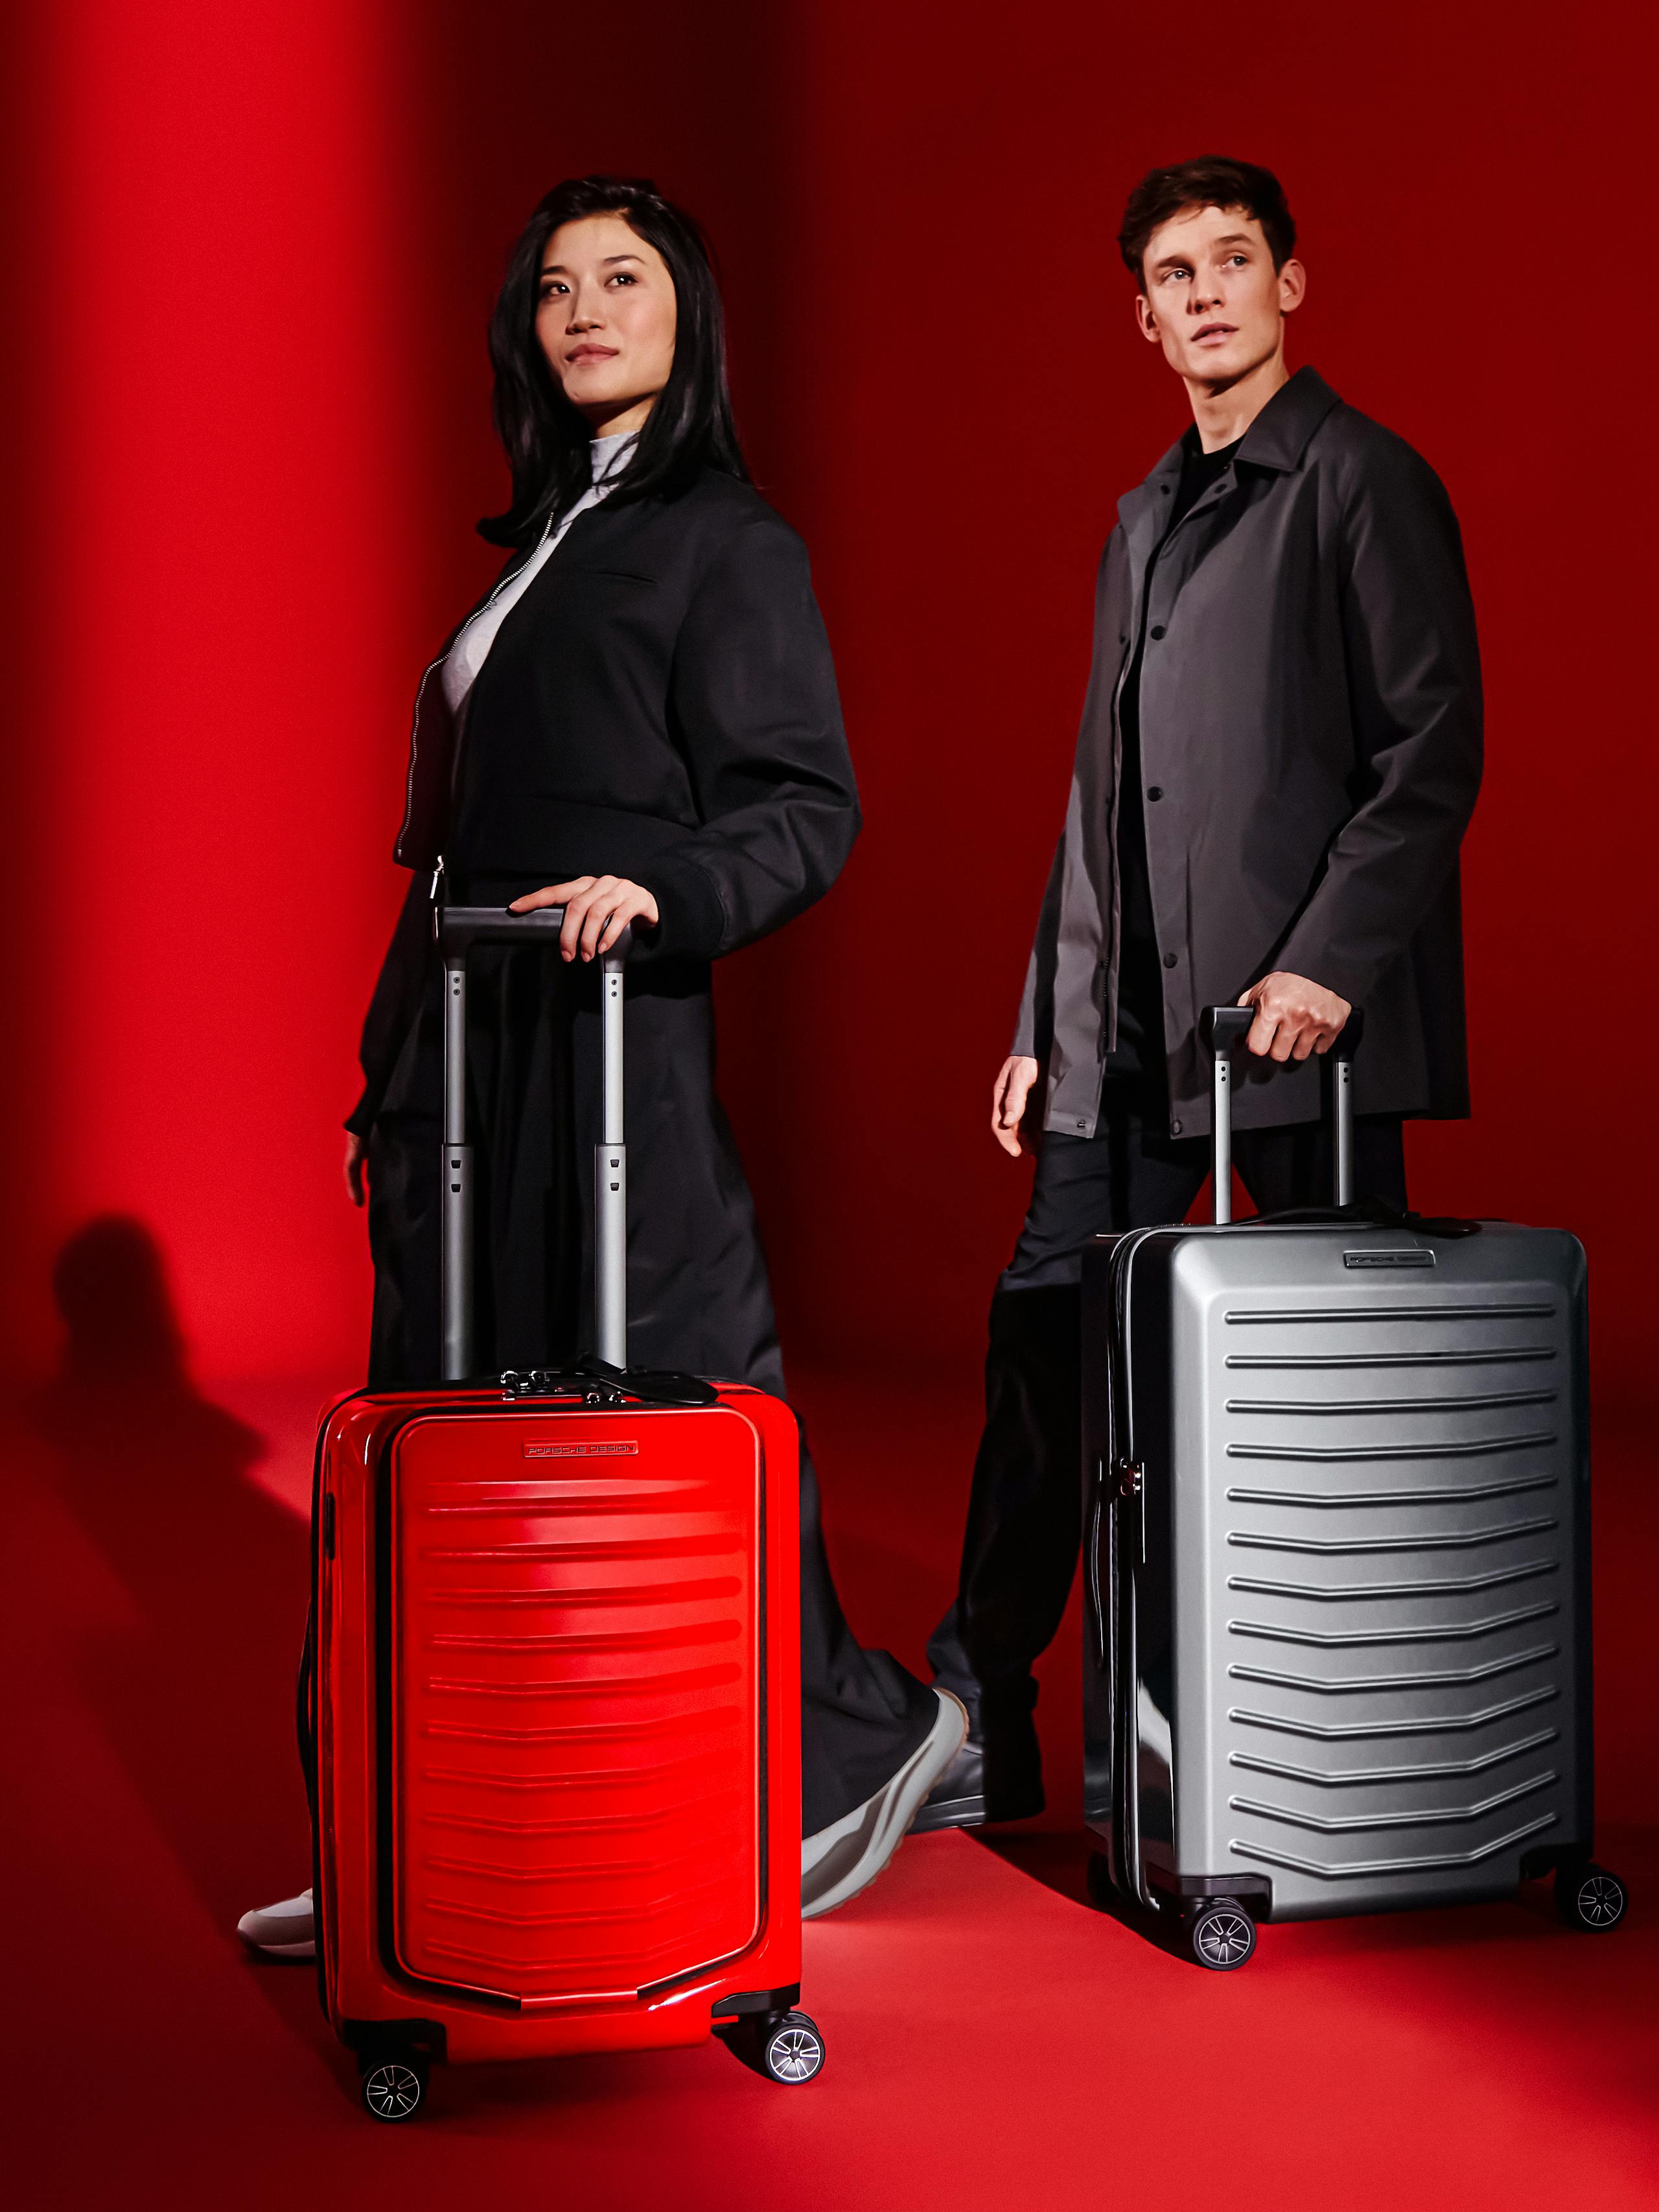 A woman pushing a red Porsche Design hardcase trolley suitcase, in front of a man pushing a grey Porsche Design Hardcase Trolley suitcase.